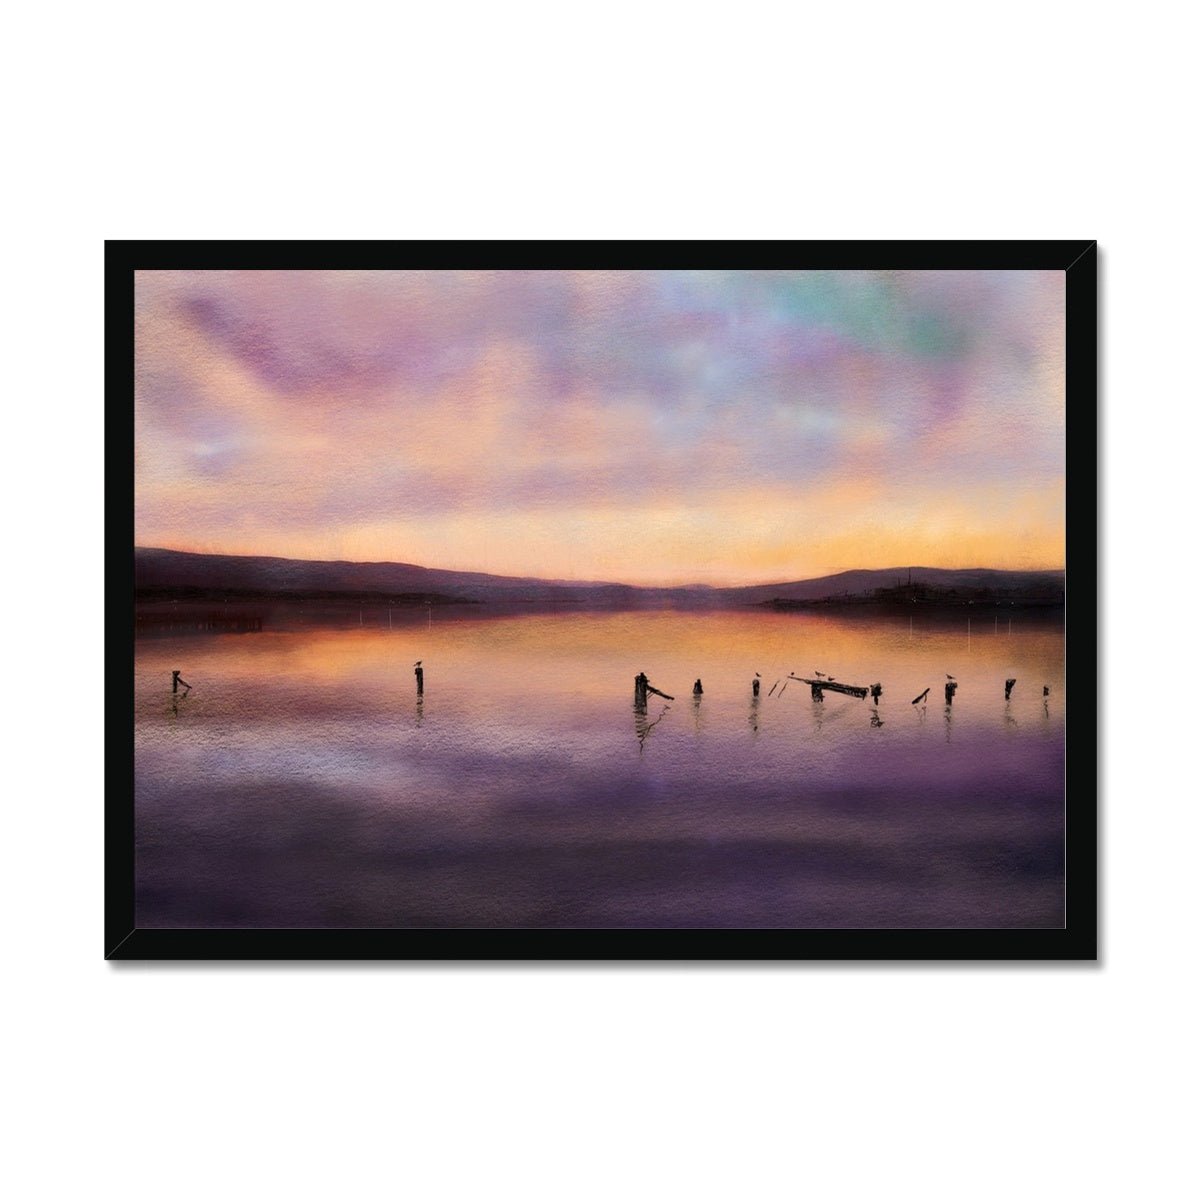 Admiralty Jetty Dusk Painting | Framed Prints From Scotland-Framed Prints-River Clyde Art Gallery-A2 Landscape-Black Frame-Paintings, Prints, Homeware, Art Gifts From Scotland By Scottish Artist Kevin Hunter